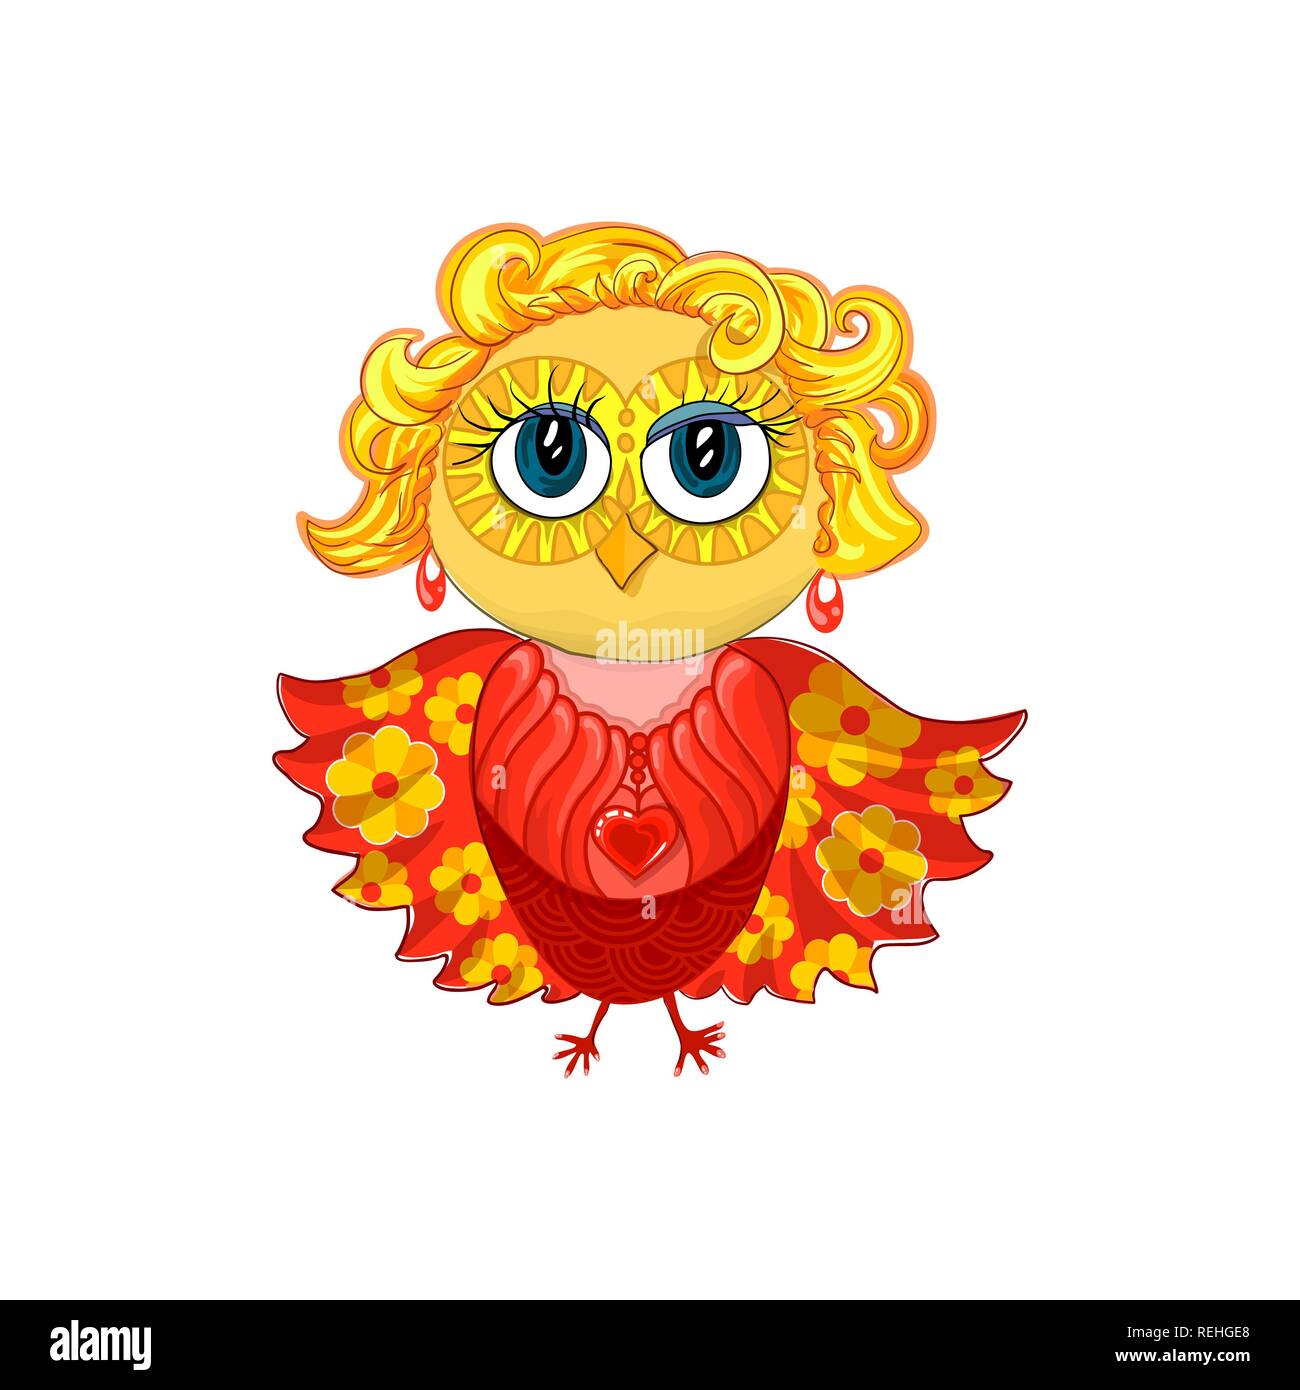 Cute feminine owl with blond hair, earrings, pendant or medallion with red heart and beautiful make up eyes. Spread wings with yellow flower pattern. Isolated vector element for cartoon design. Stock Vector